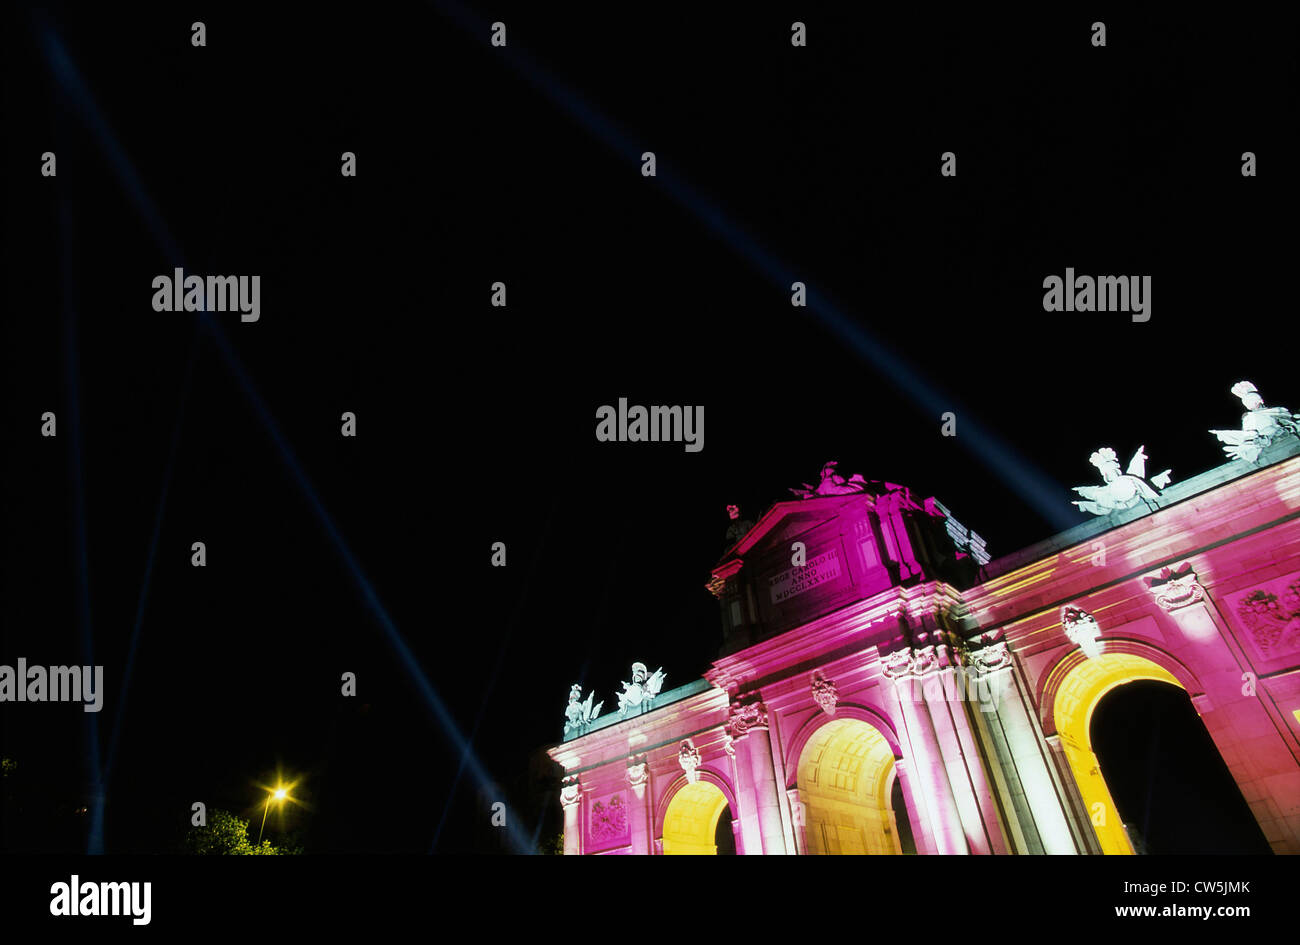 High section view of a building lit up at night, Puerta de Alcala, Madrid, Spain Stock Photo